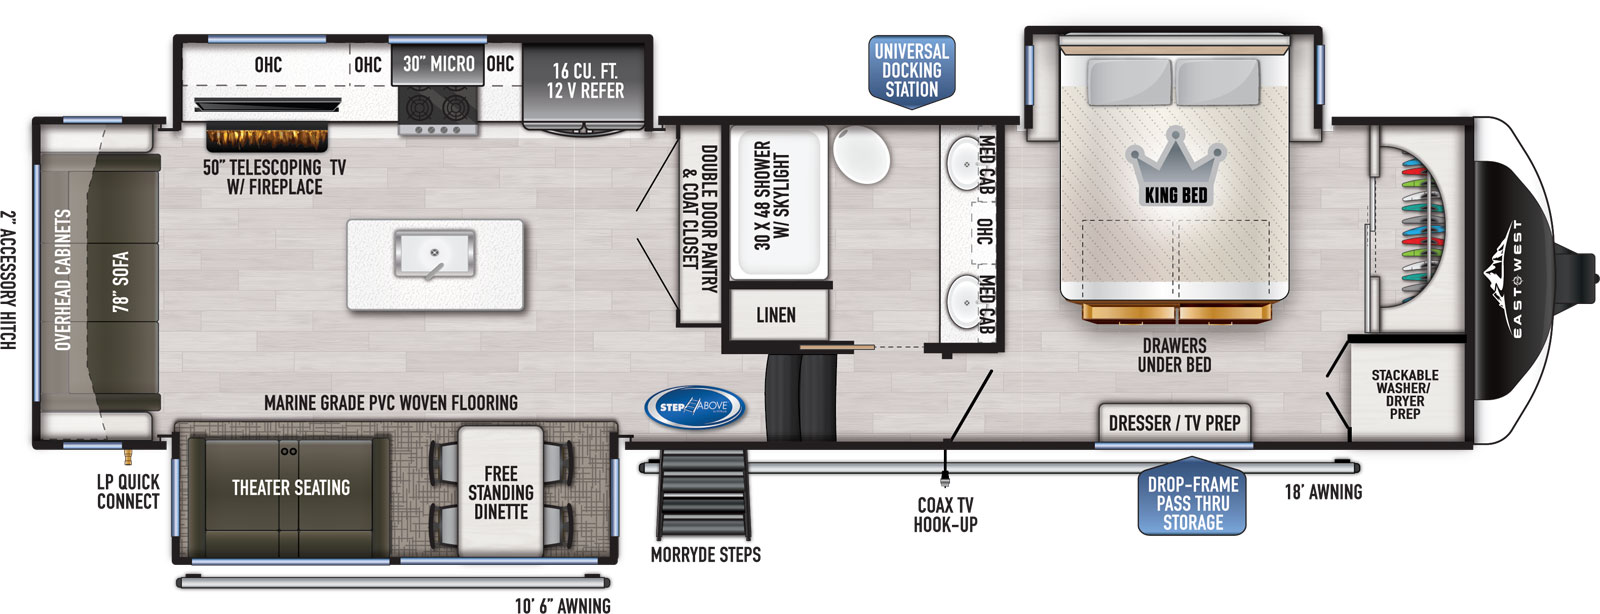 The 365 RL has 3 slide outs, two on the off door side and one on the door side along with one entry door. Interior layout from front to back: front bedroom with front closet and off door side slide-out with king bed and underbed storage; side aisle bathroom with solid pocket doors, shower, dual medicine cabinets above the double sink vanity and a porcelain toilet; kitchen living dining area features a double door pantry and coat closet; kitchen island with deep seated sink; off door side slide-out containing refrigerator, oven, microwave and entertainment center; door side slide-out containing dinette and theater seating; and a 78" wide rear sofa with 72" wide rear window and overhead cabinets above.